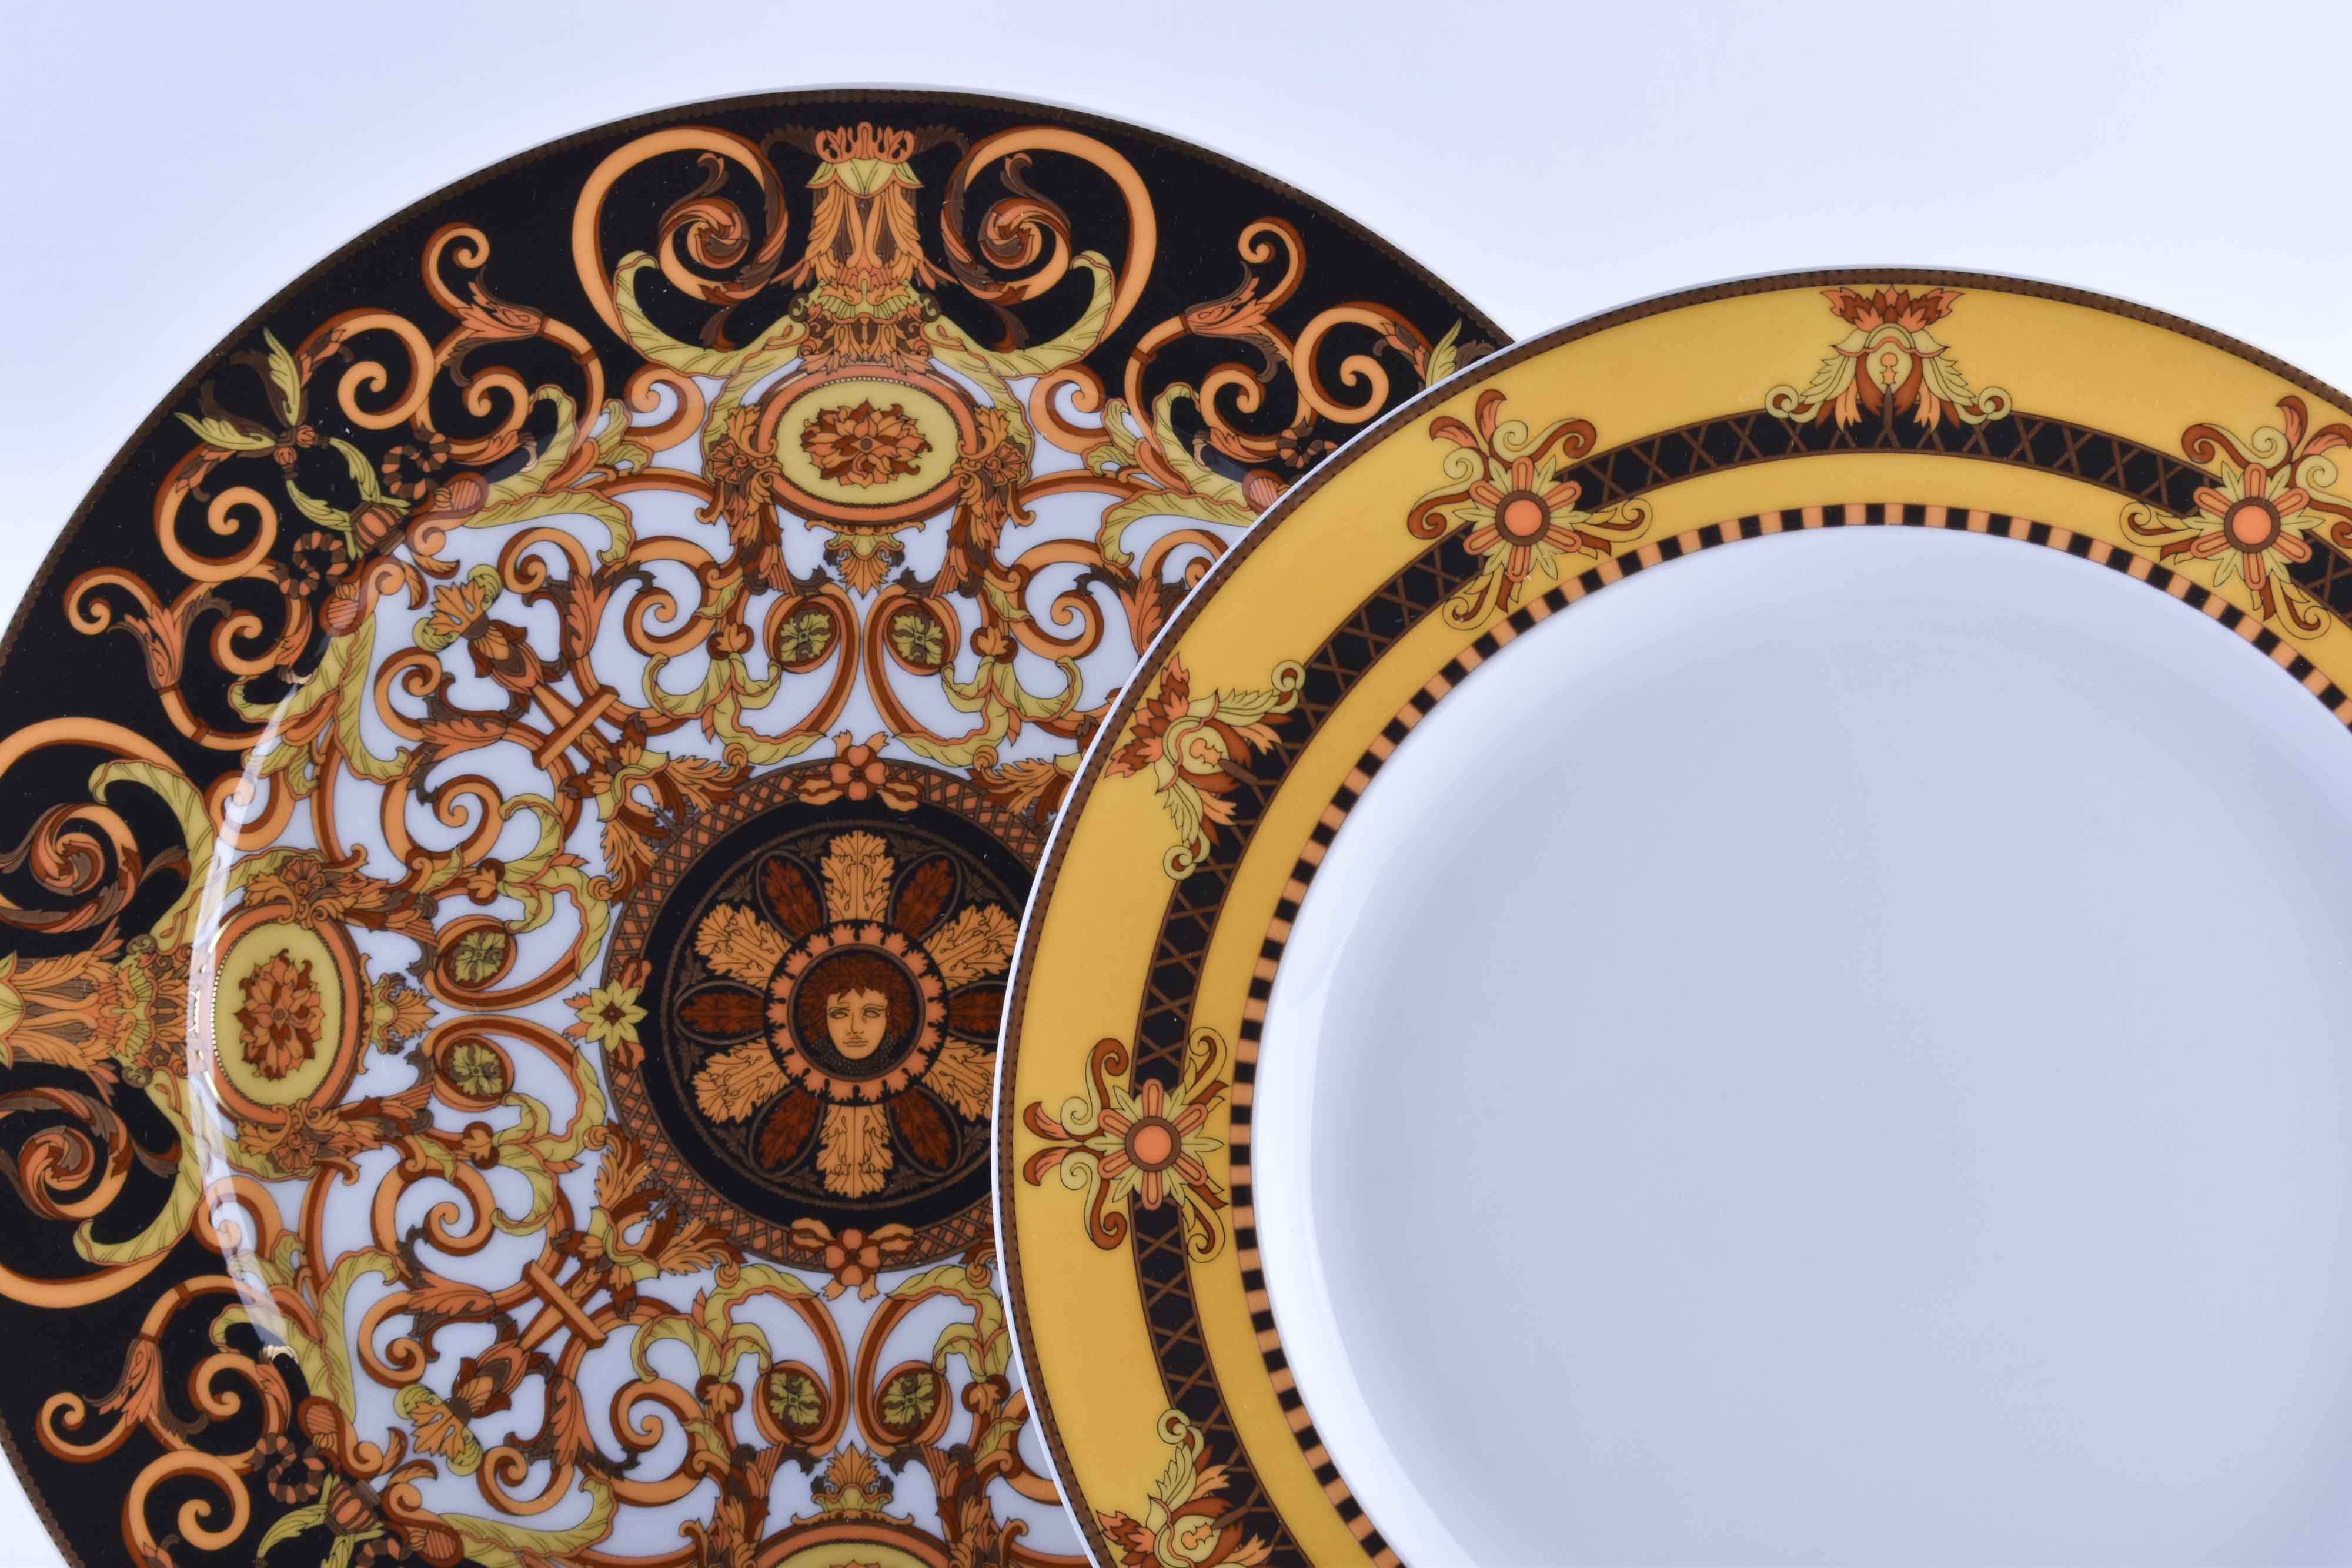 Group of porcelain, dinner plates Rosenthal Versace Barocco  - Image 2 of 4